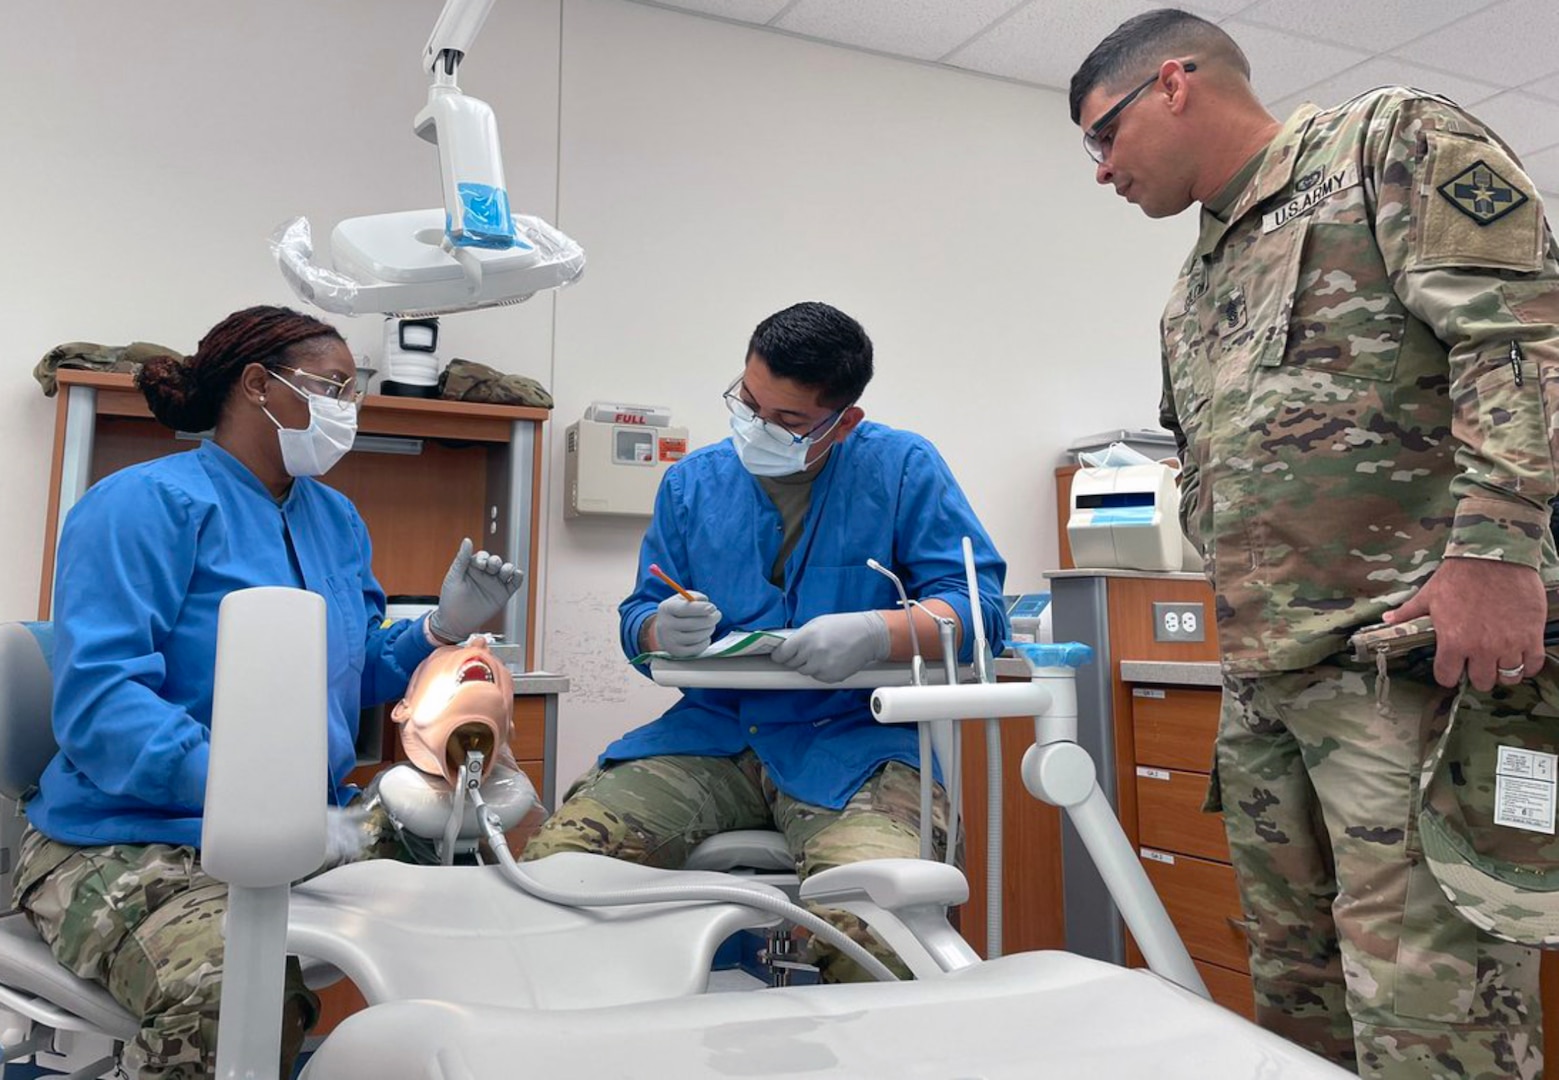 Dental students practice their skills while treating Soldiers, dependents, retirees